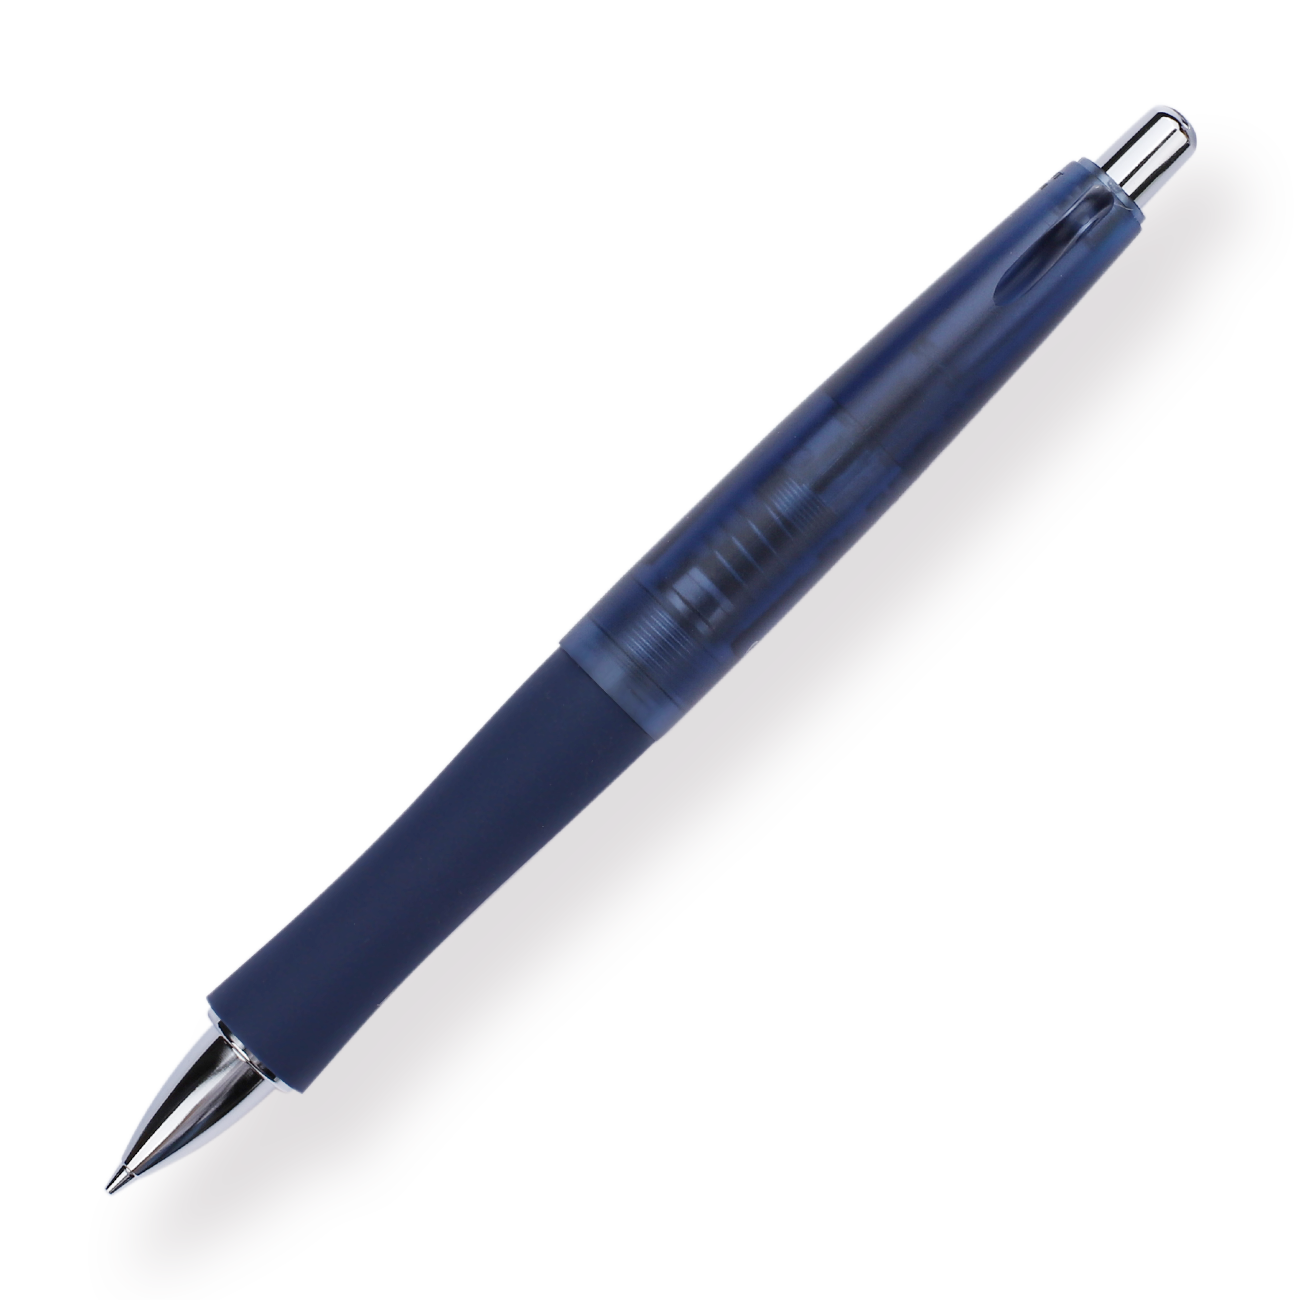 Pilot Dr. Grip Limited Edition Mechanical Pencil - 0.5 mm - Classic - Navy - Stationery Pal